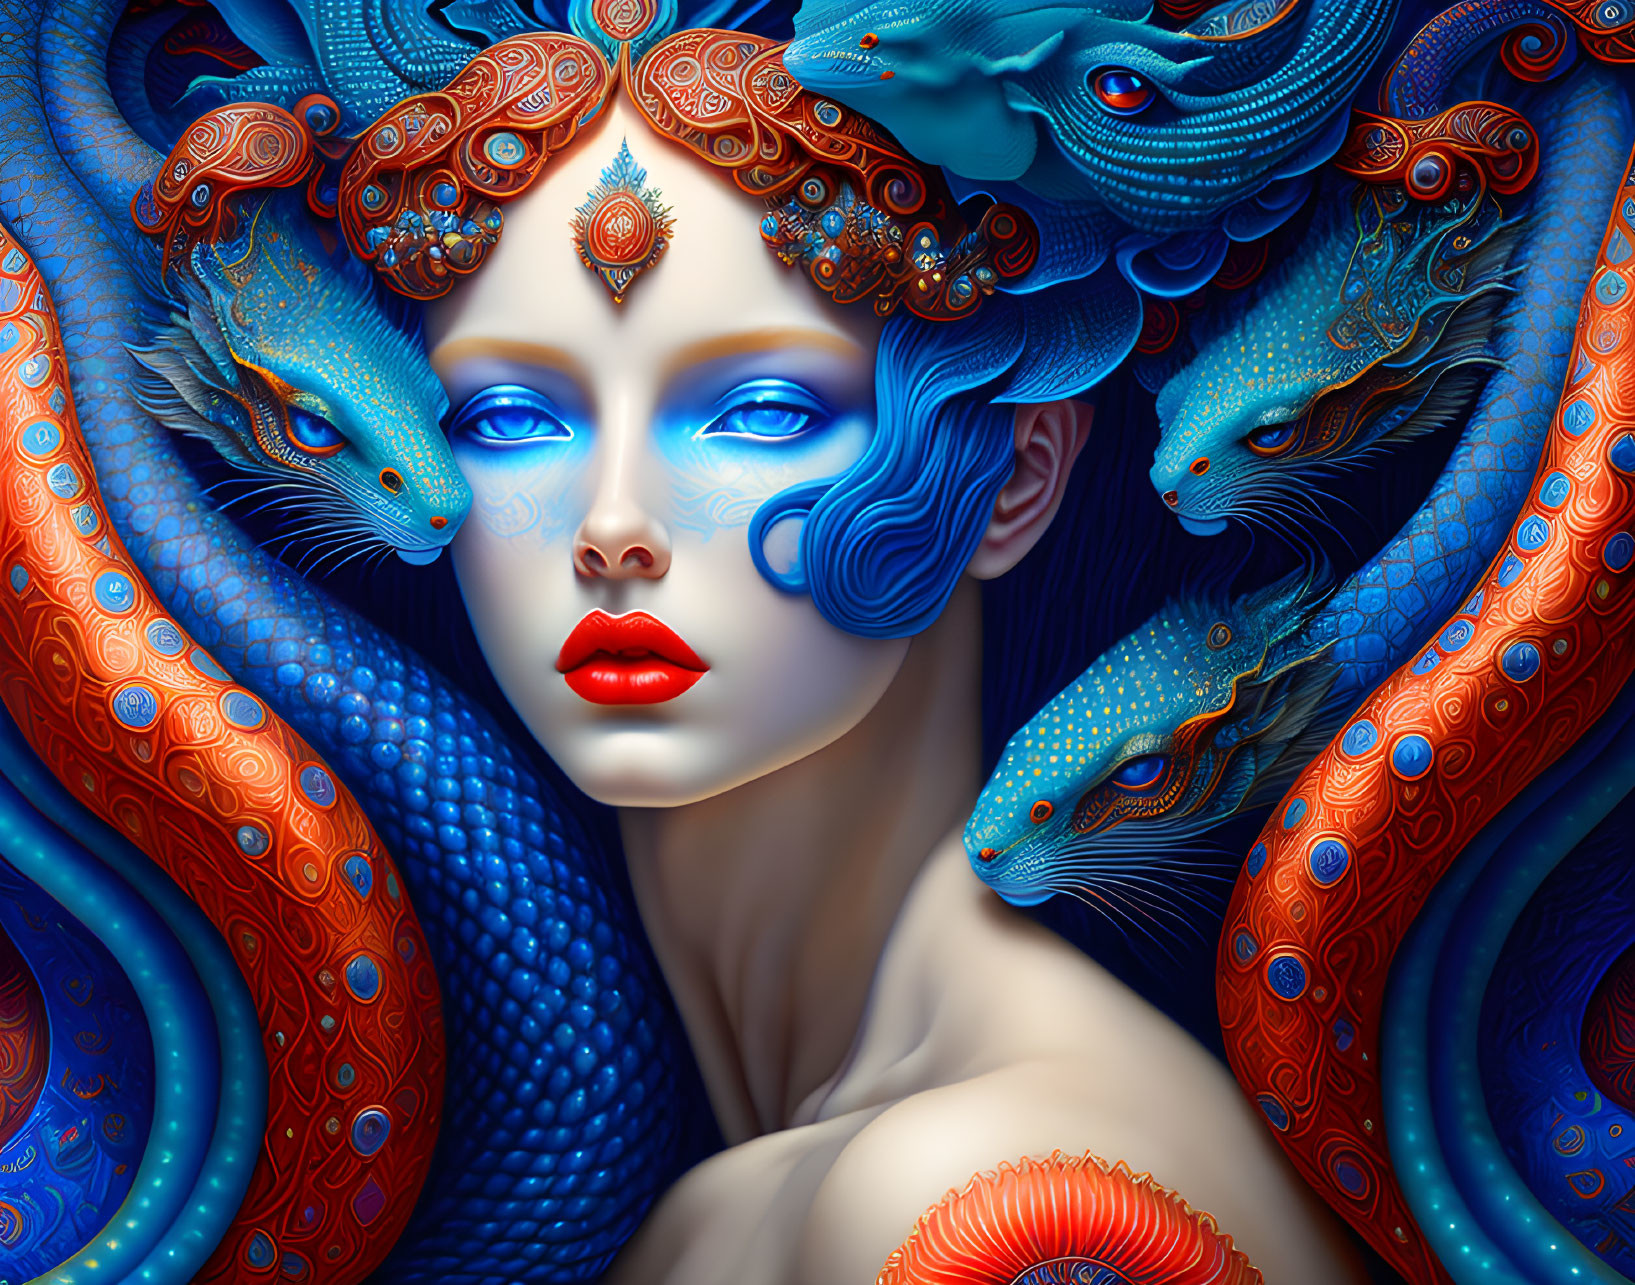 Fantastical Artwork: Pale Woman with Blue Hair and Serpents